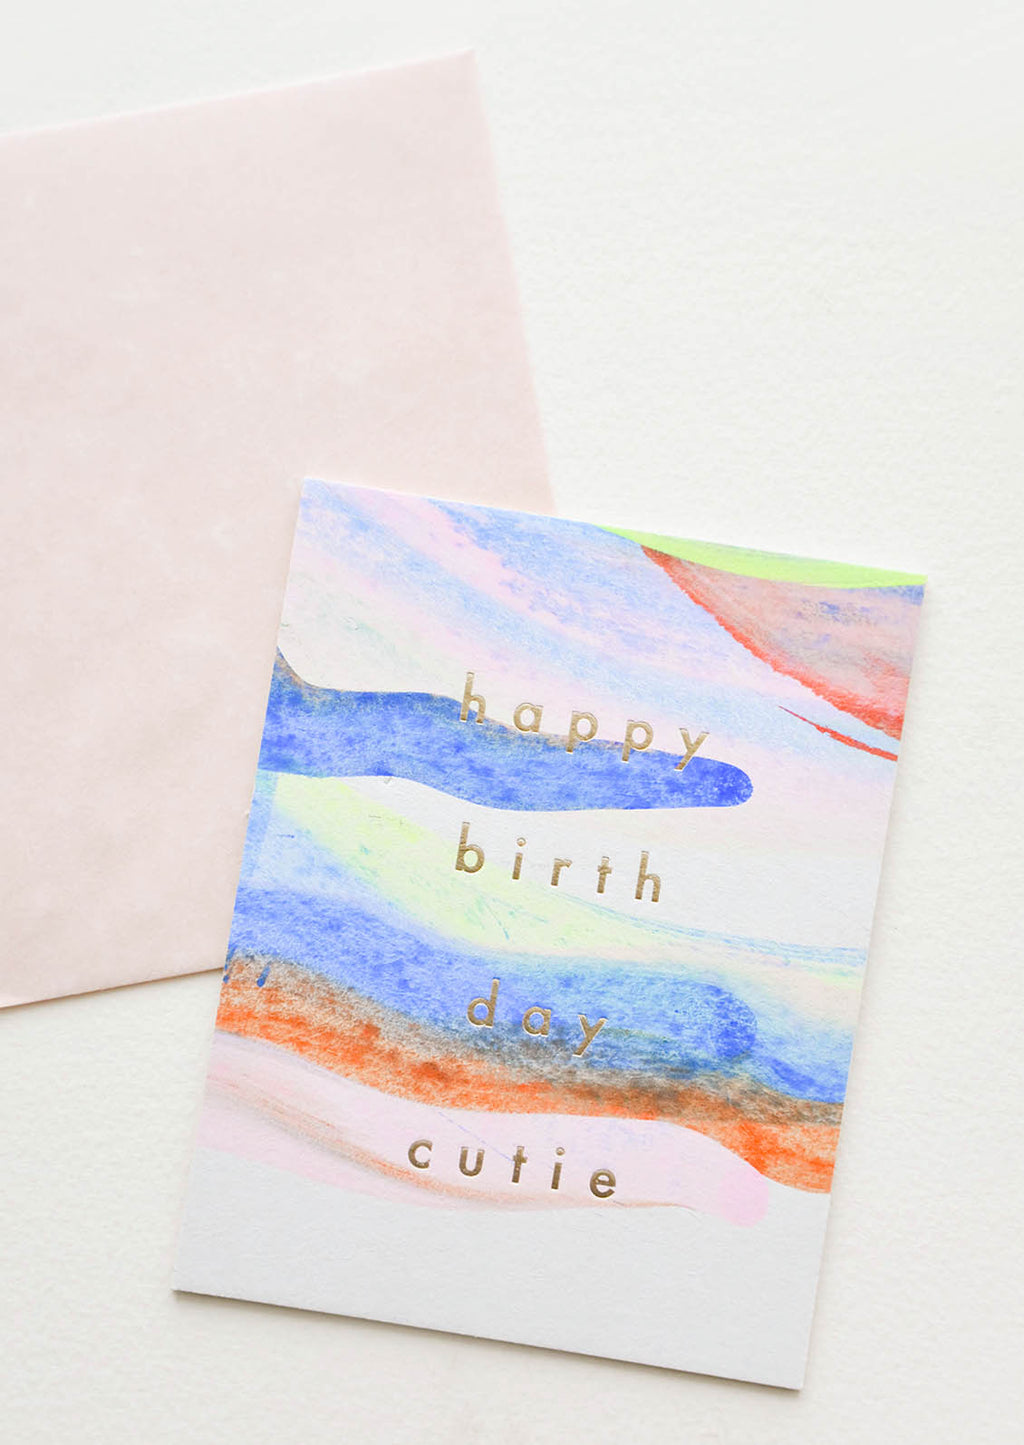 2: Notecard with pastel washed paint strokes and the text "Happy Birthday Cutie" in gold metallic, and pink envelope.